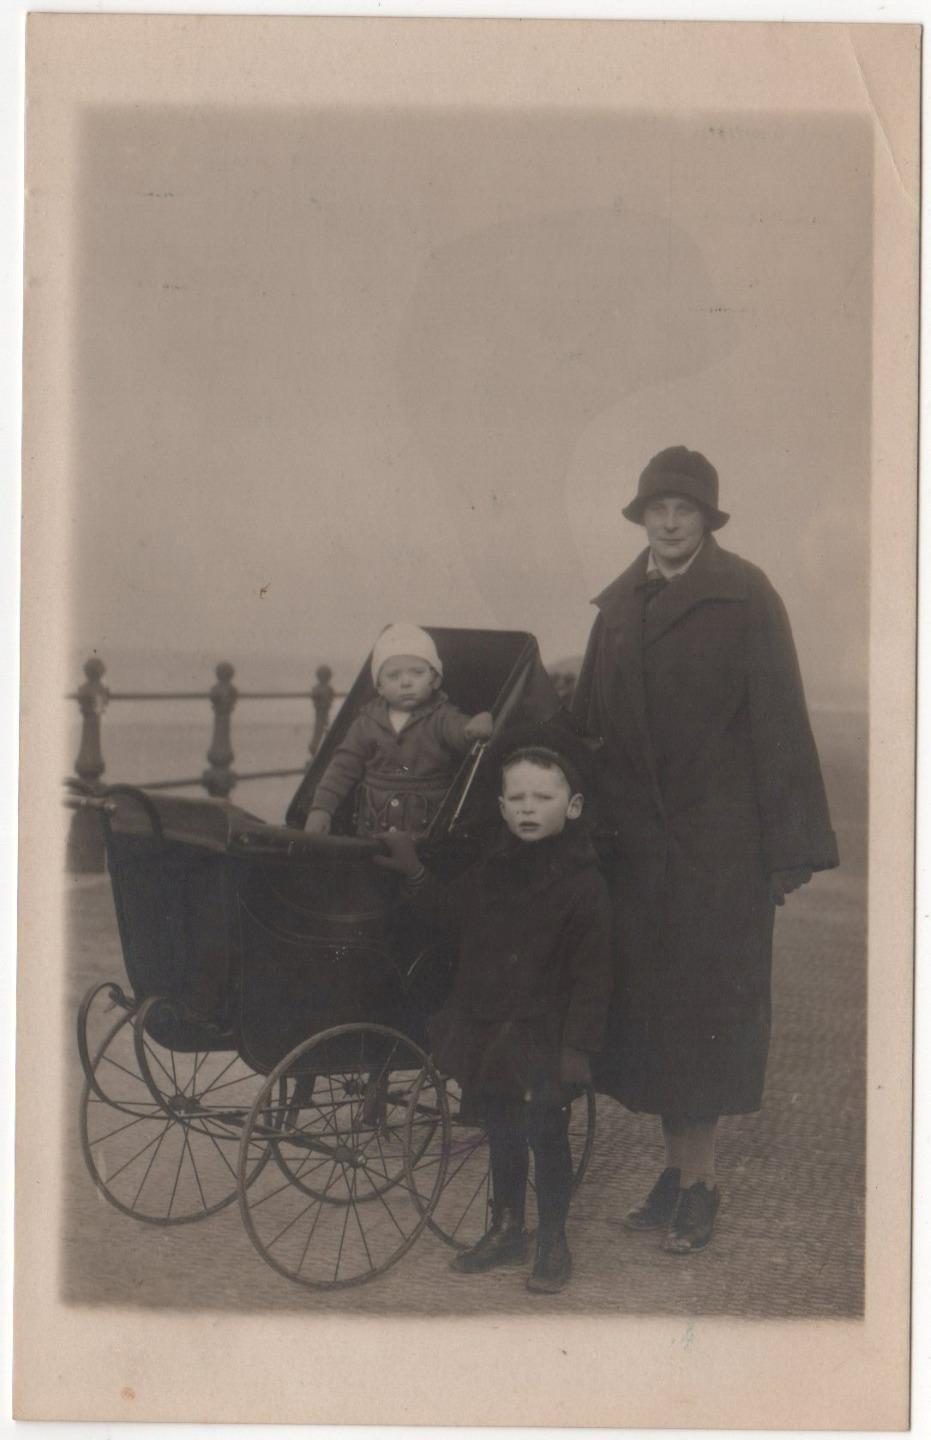 1927 RPPC Dutch family with baby pram, carriage, coach - Real Photo Postcard